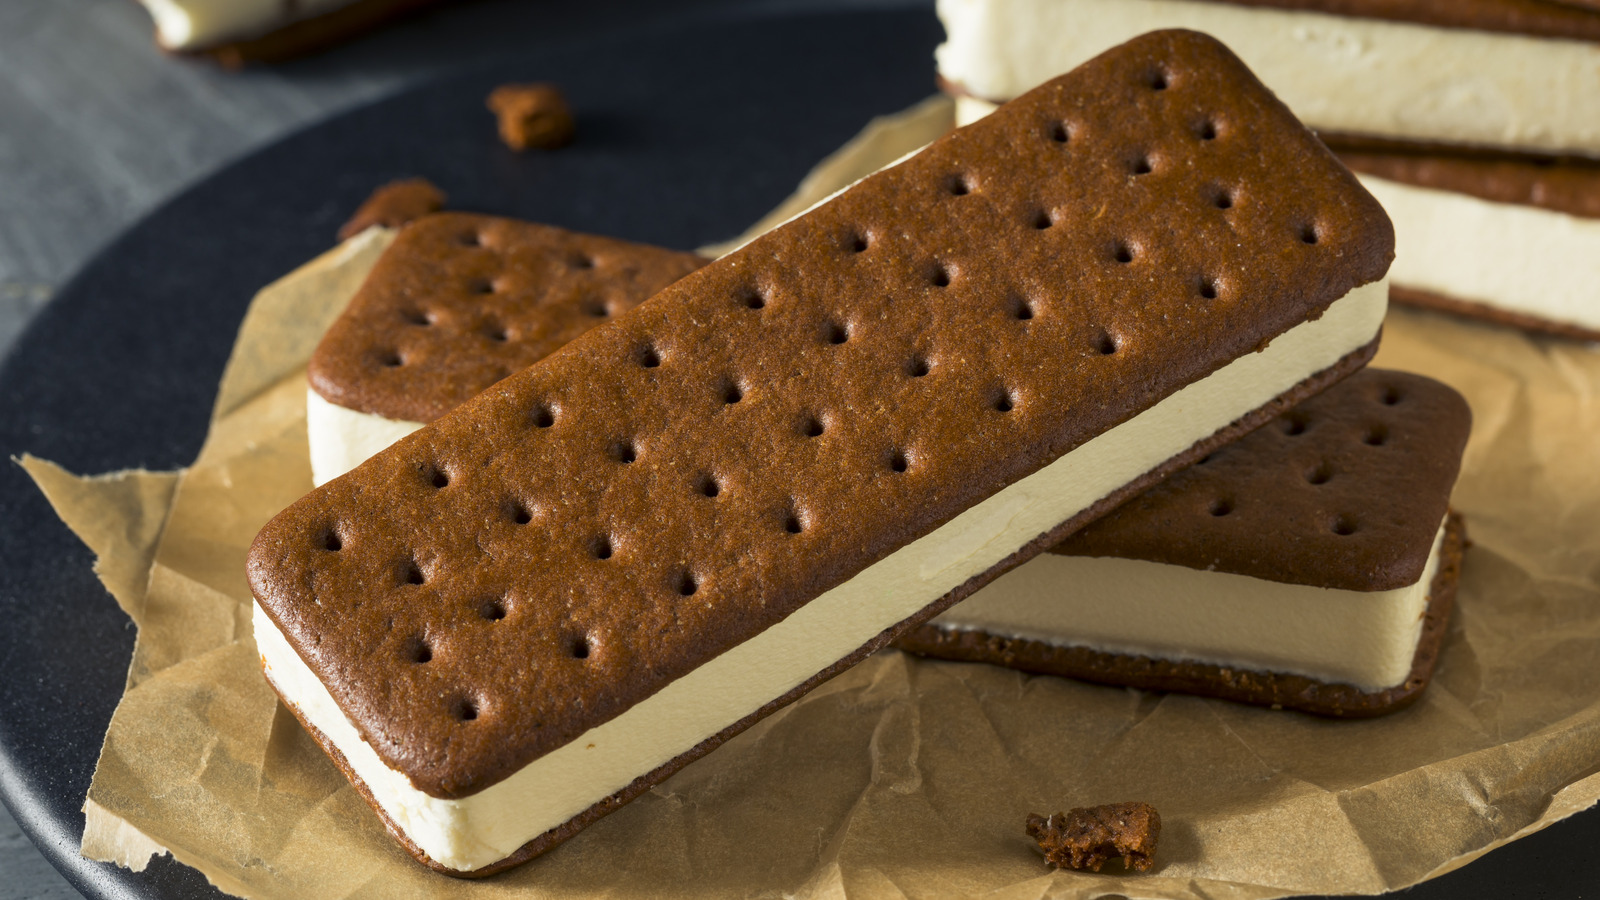 Here's The Scoop On National Ice Cream Sandwich Day